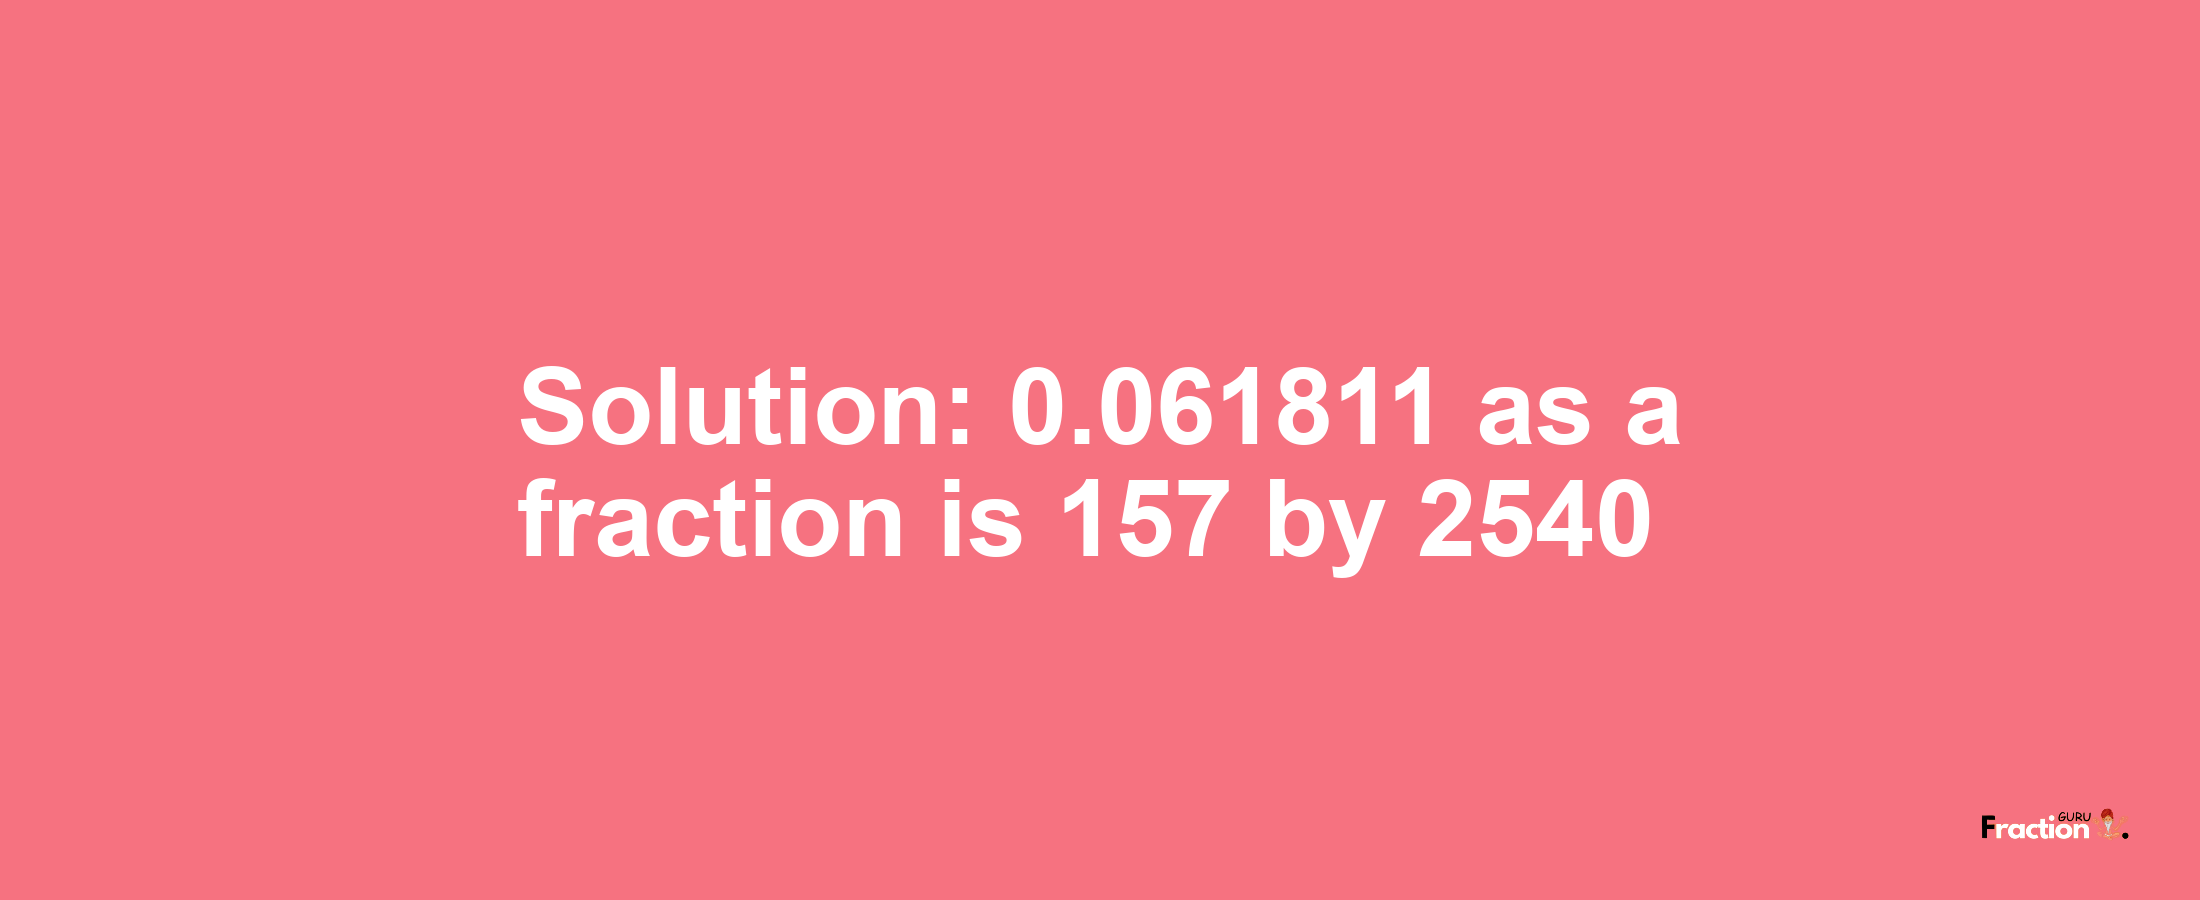 Solution:0.061811 as a fraction is 157/2540